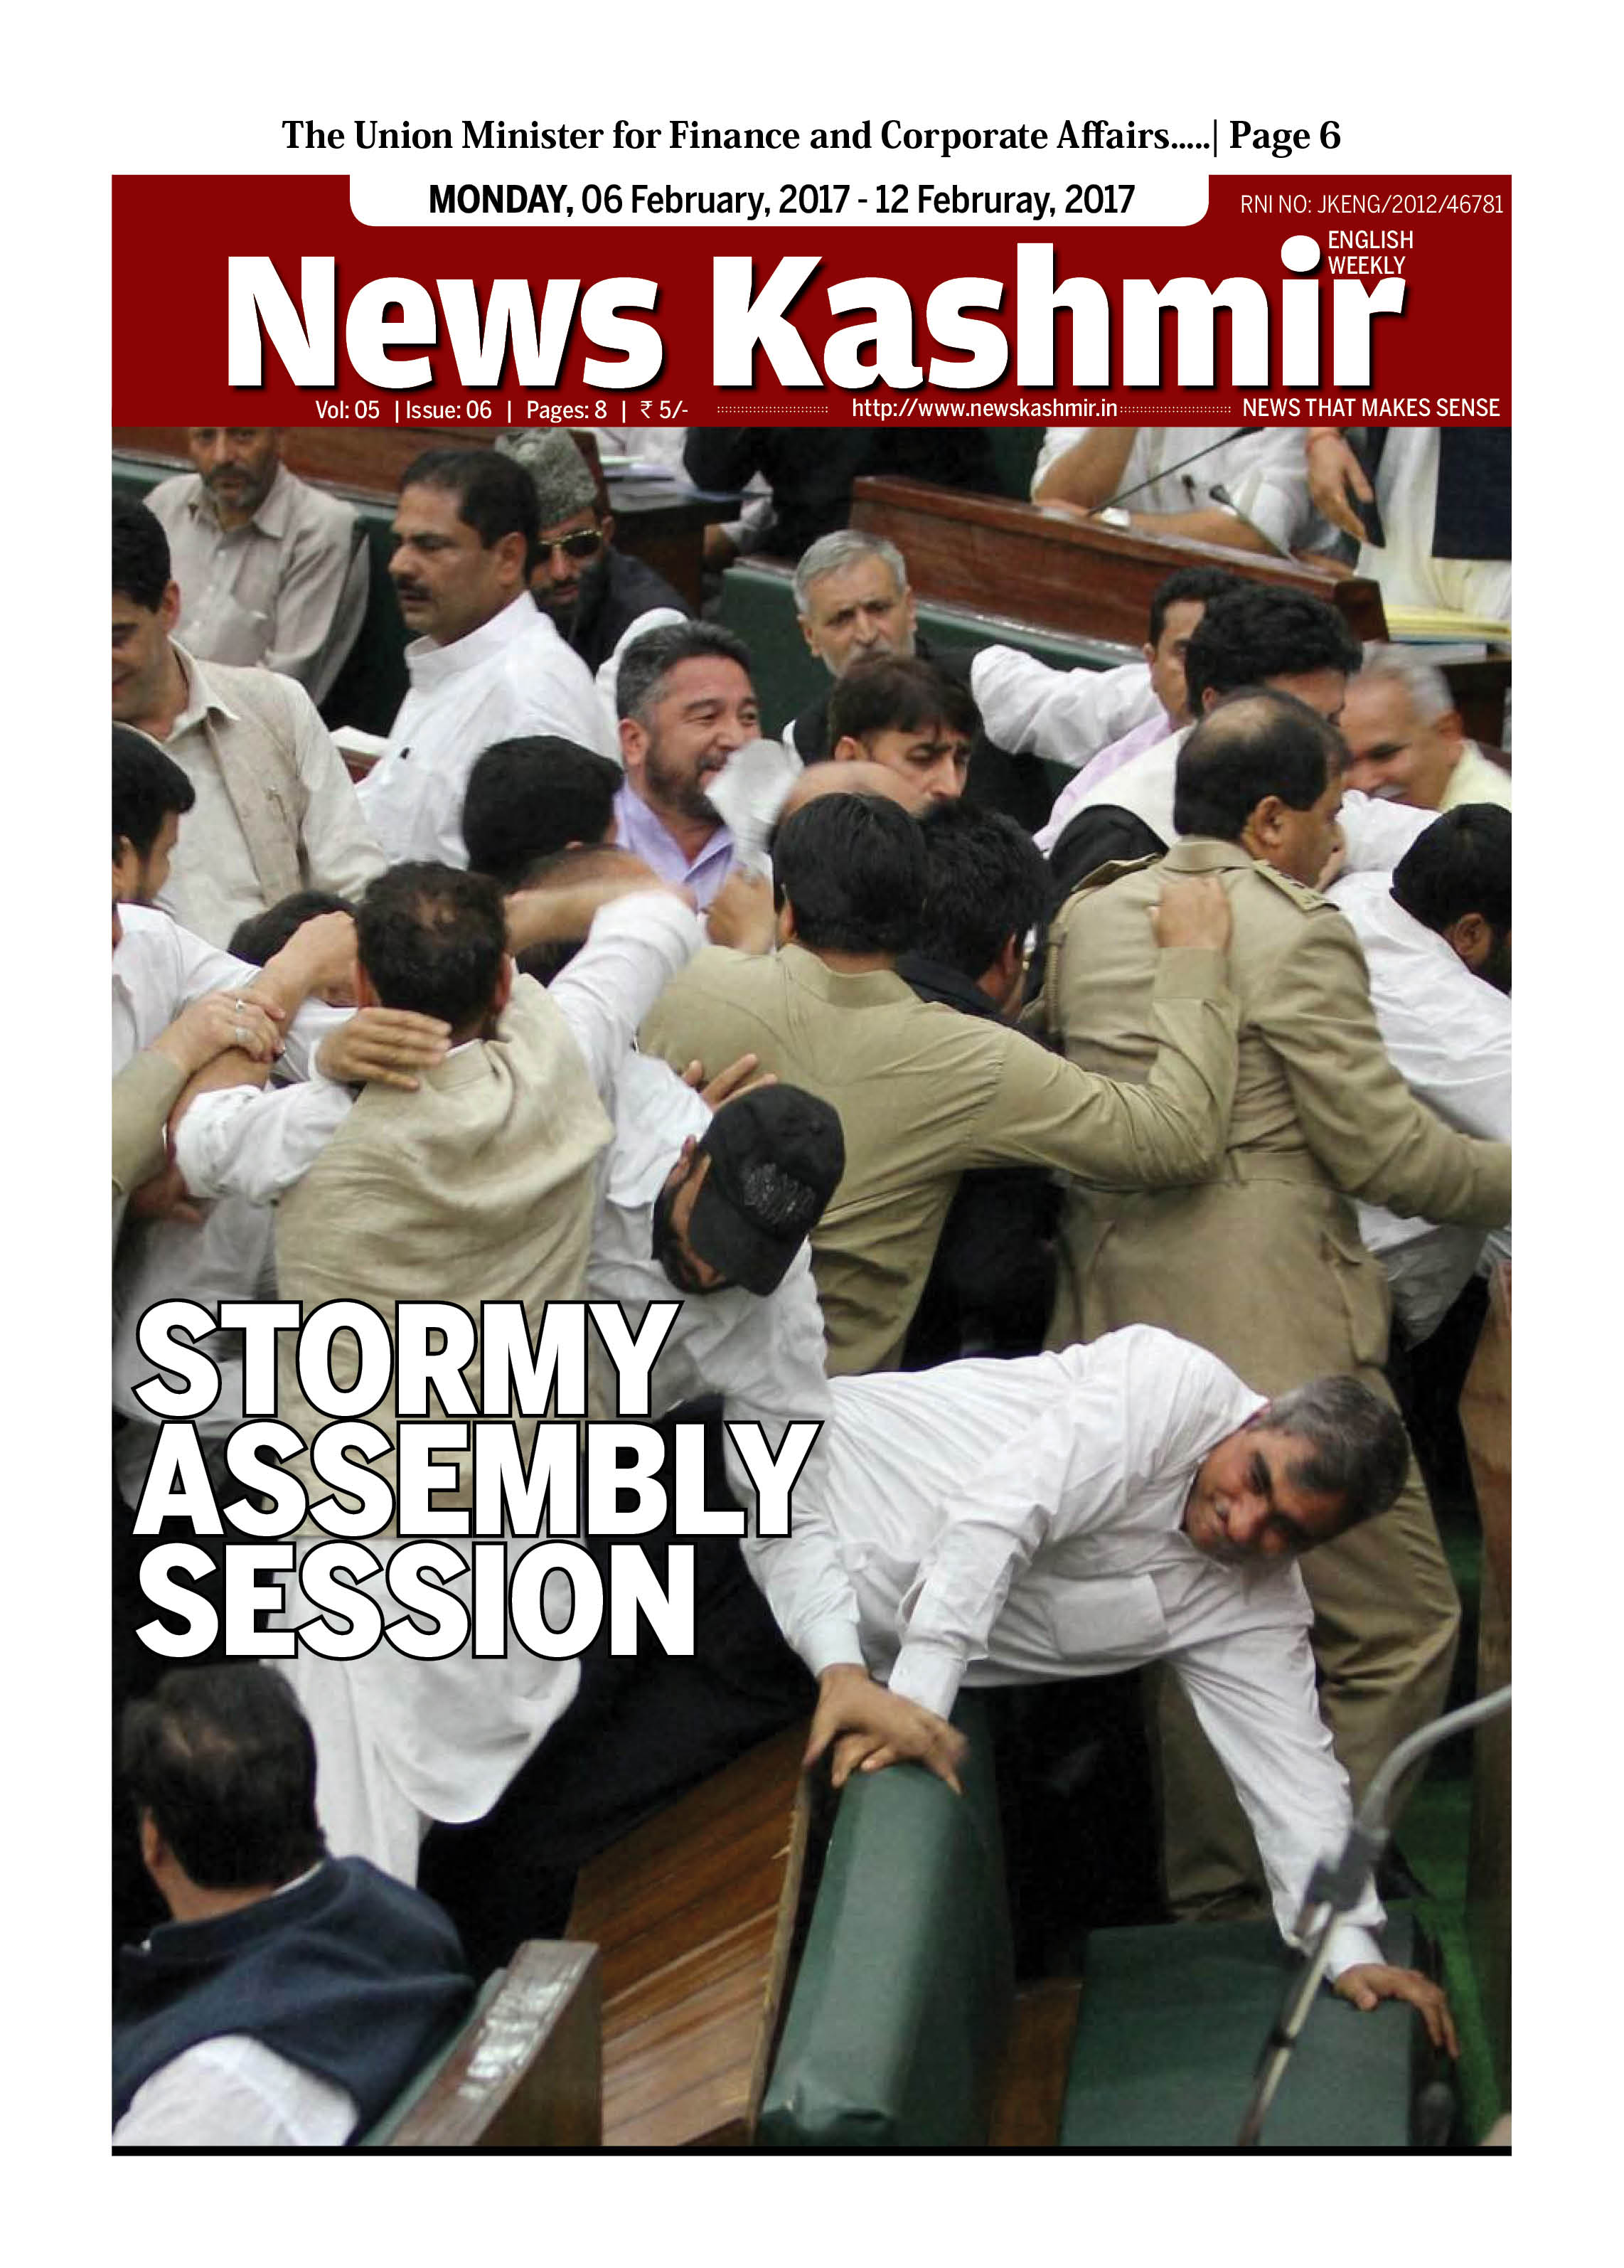 Stormy Assembly Session